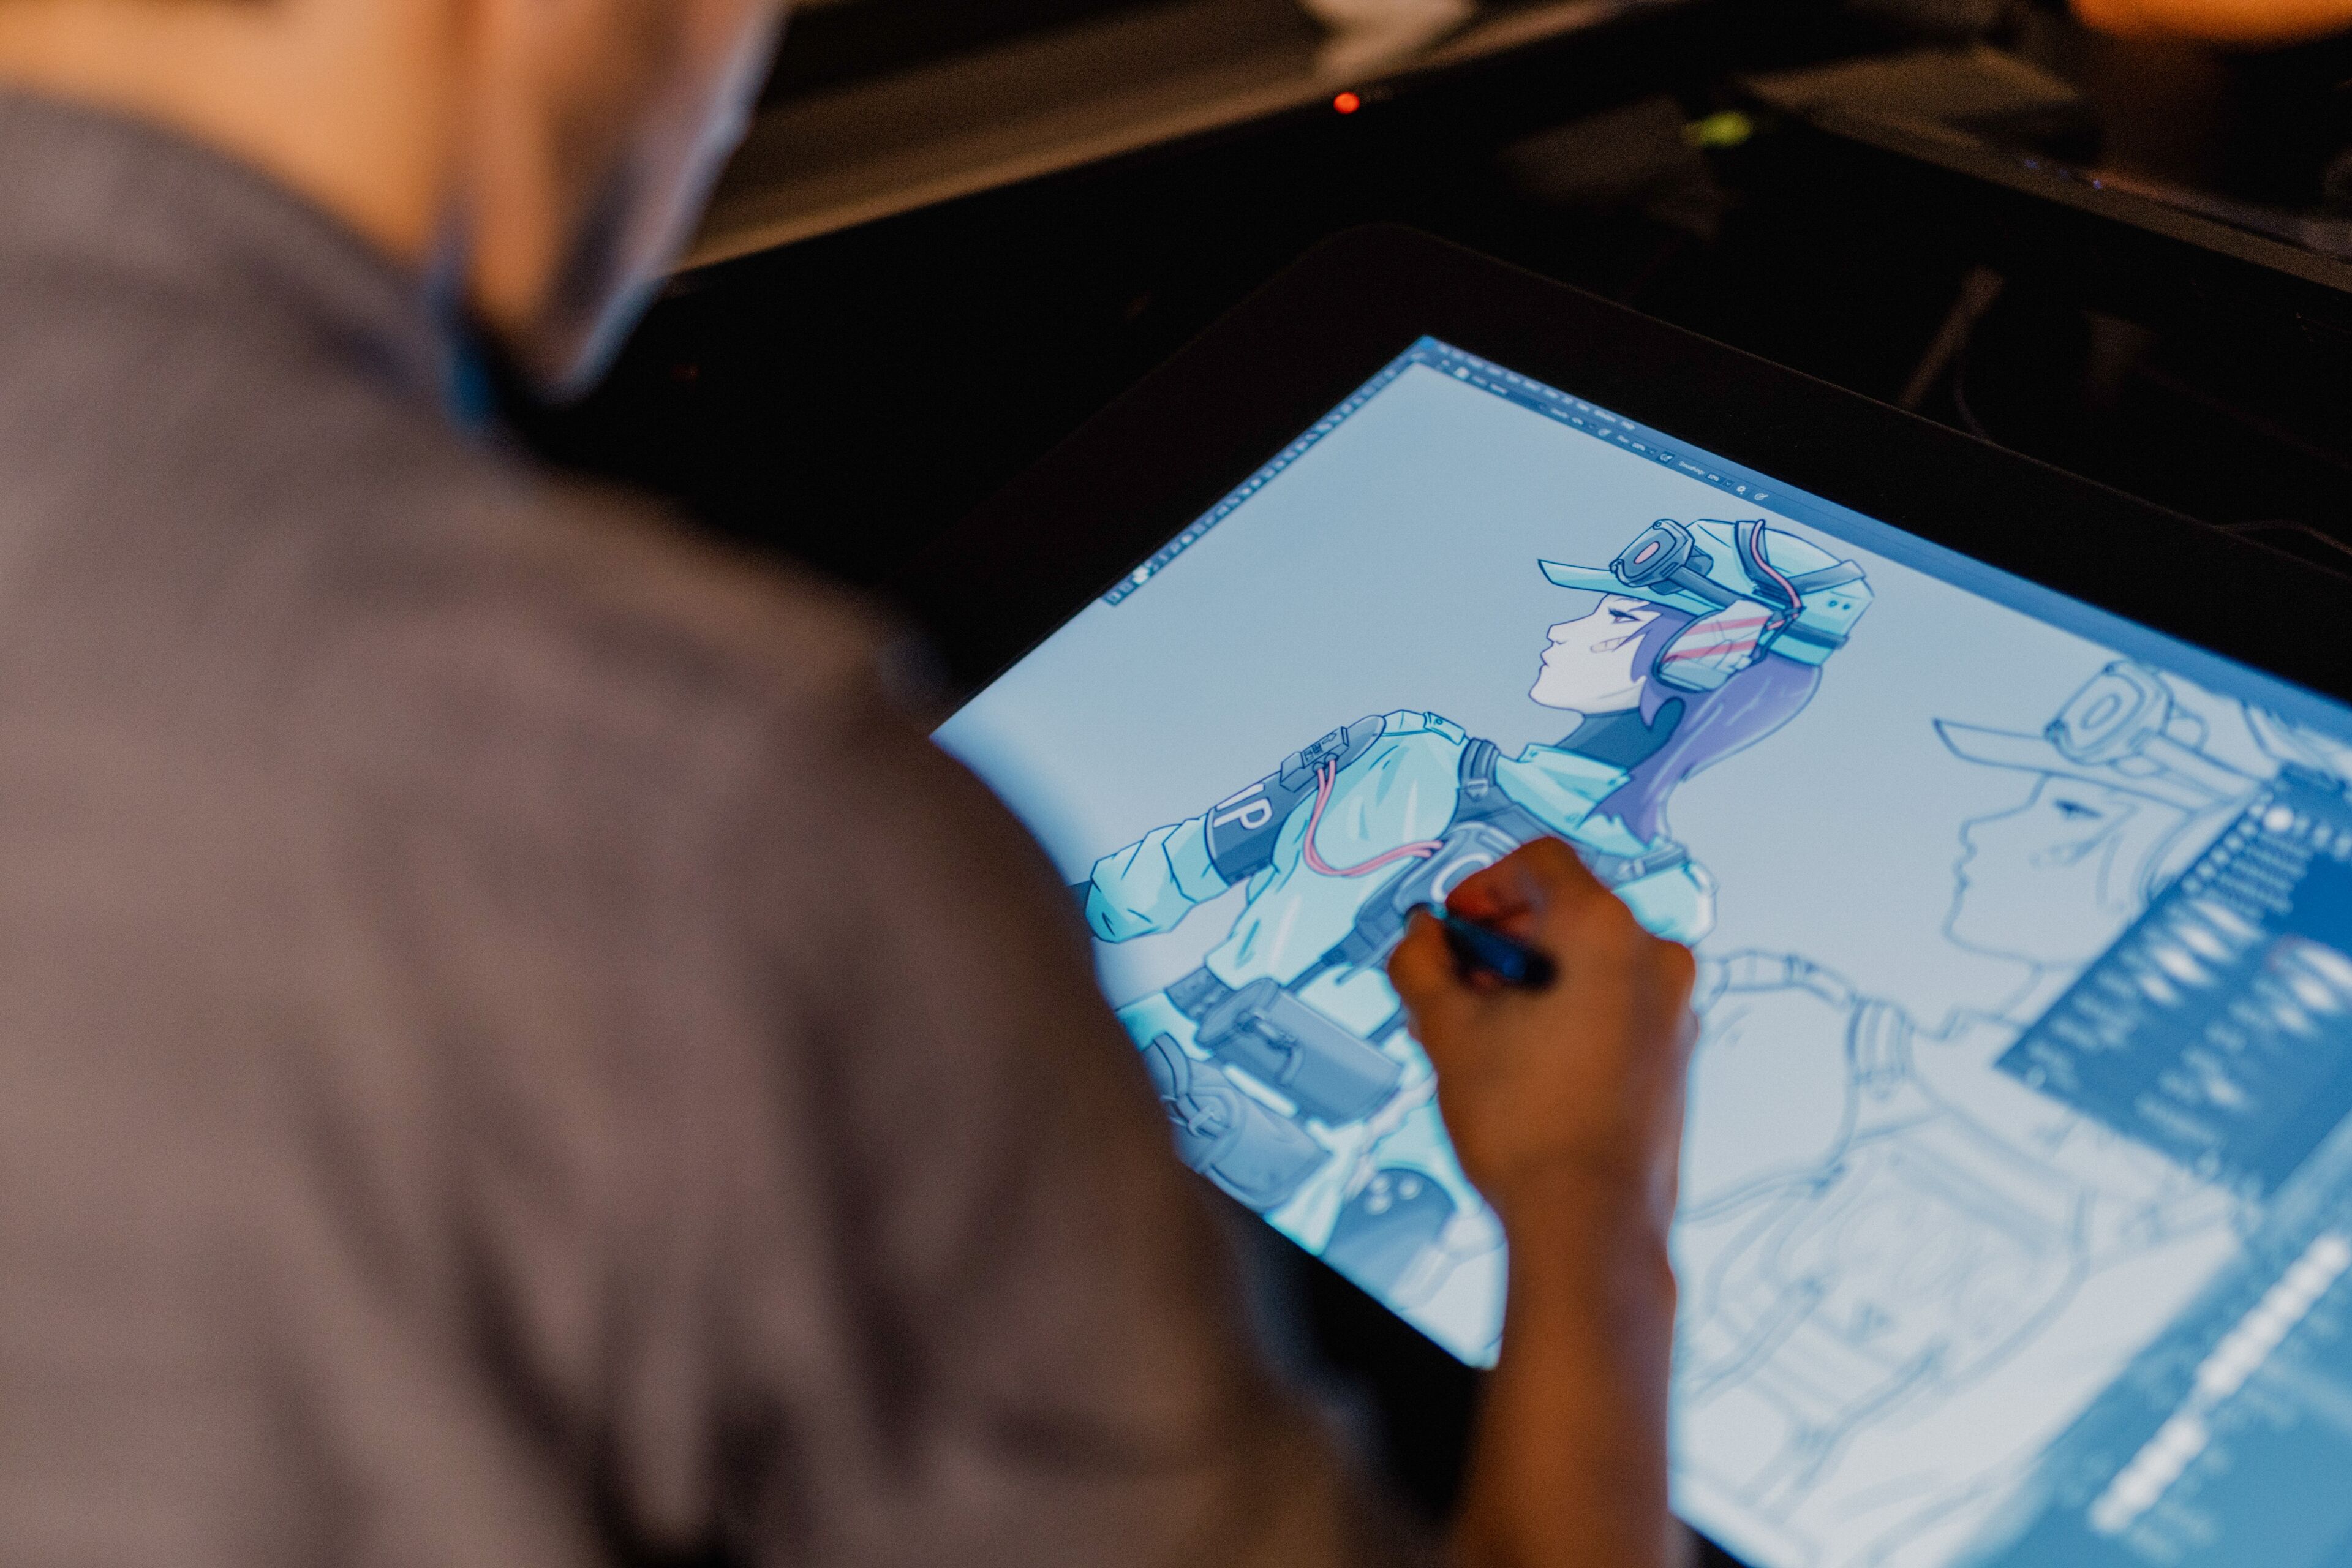 Over-the-shoulder view of an artist refining a futuristic character design on a graphic tablet.